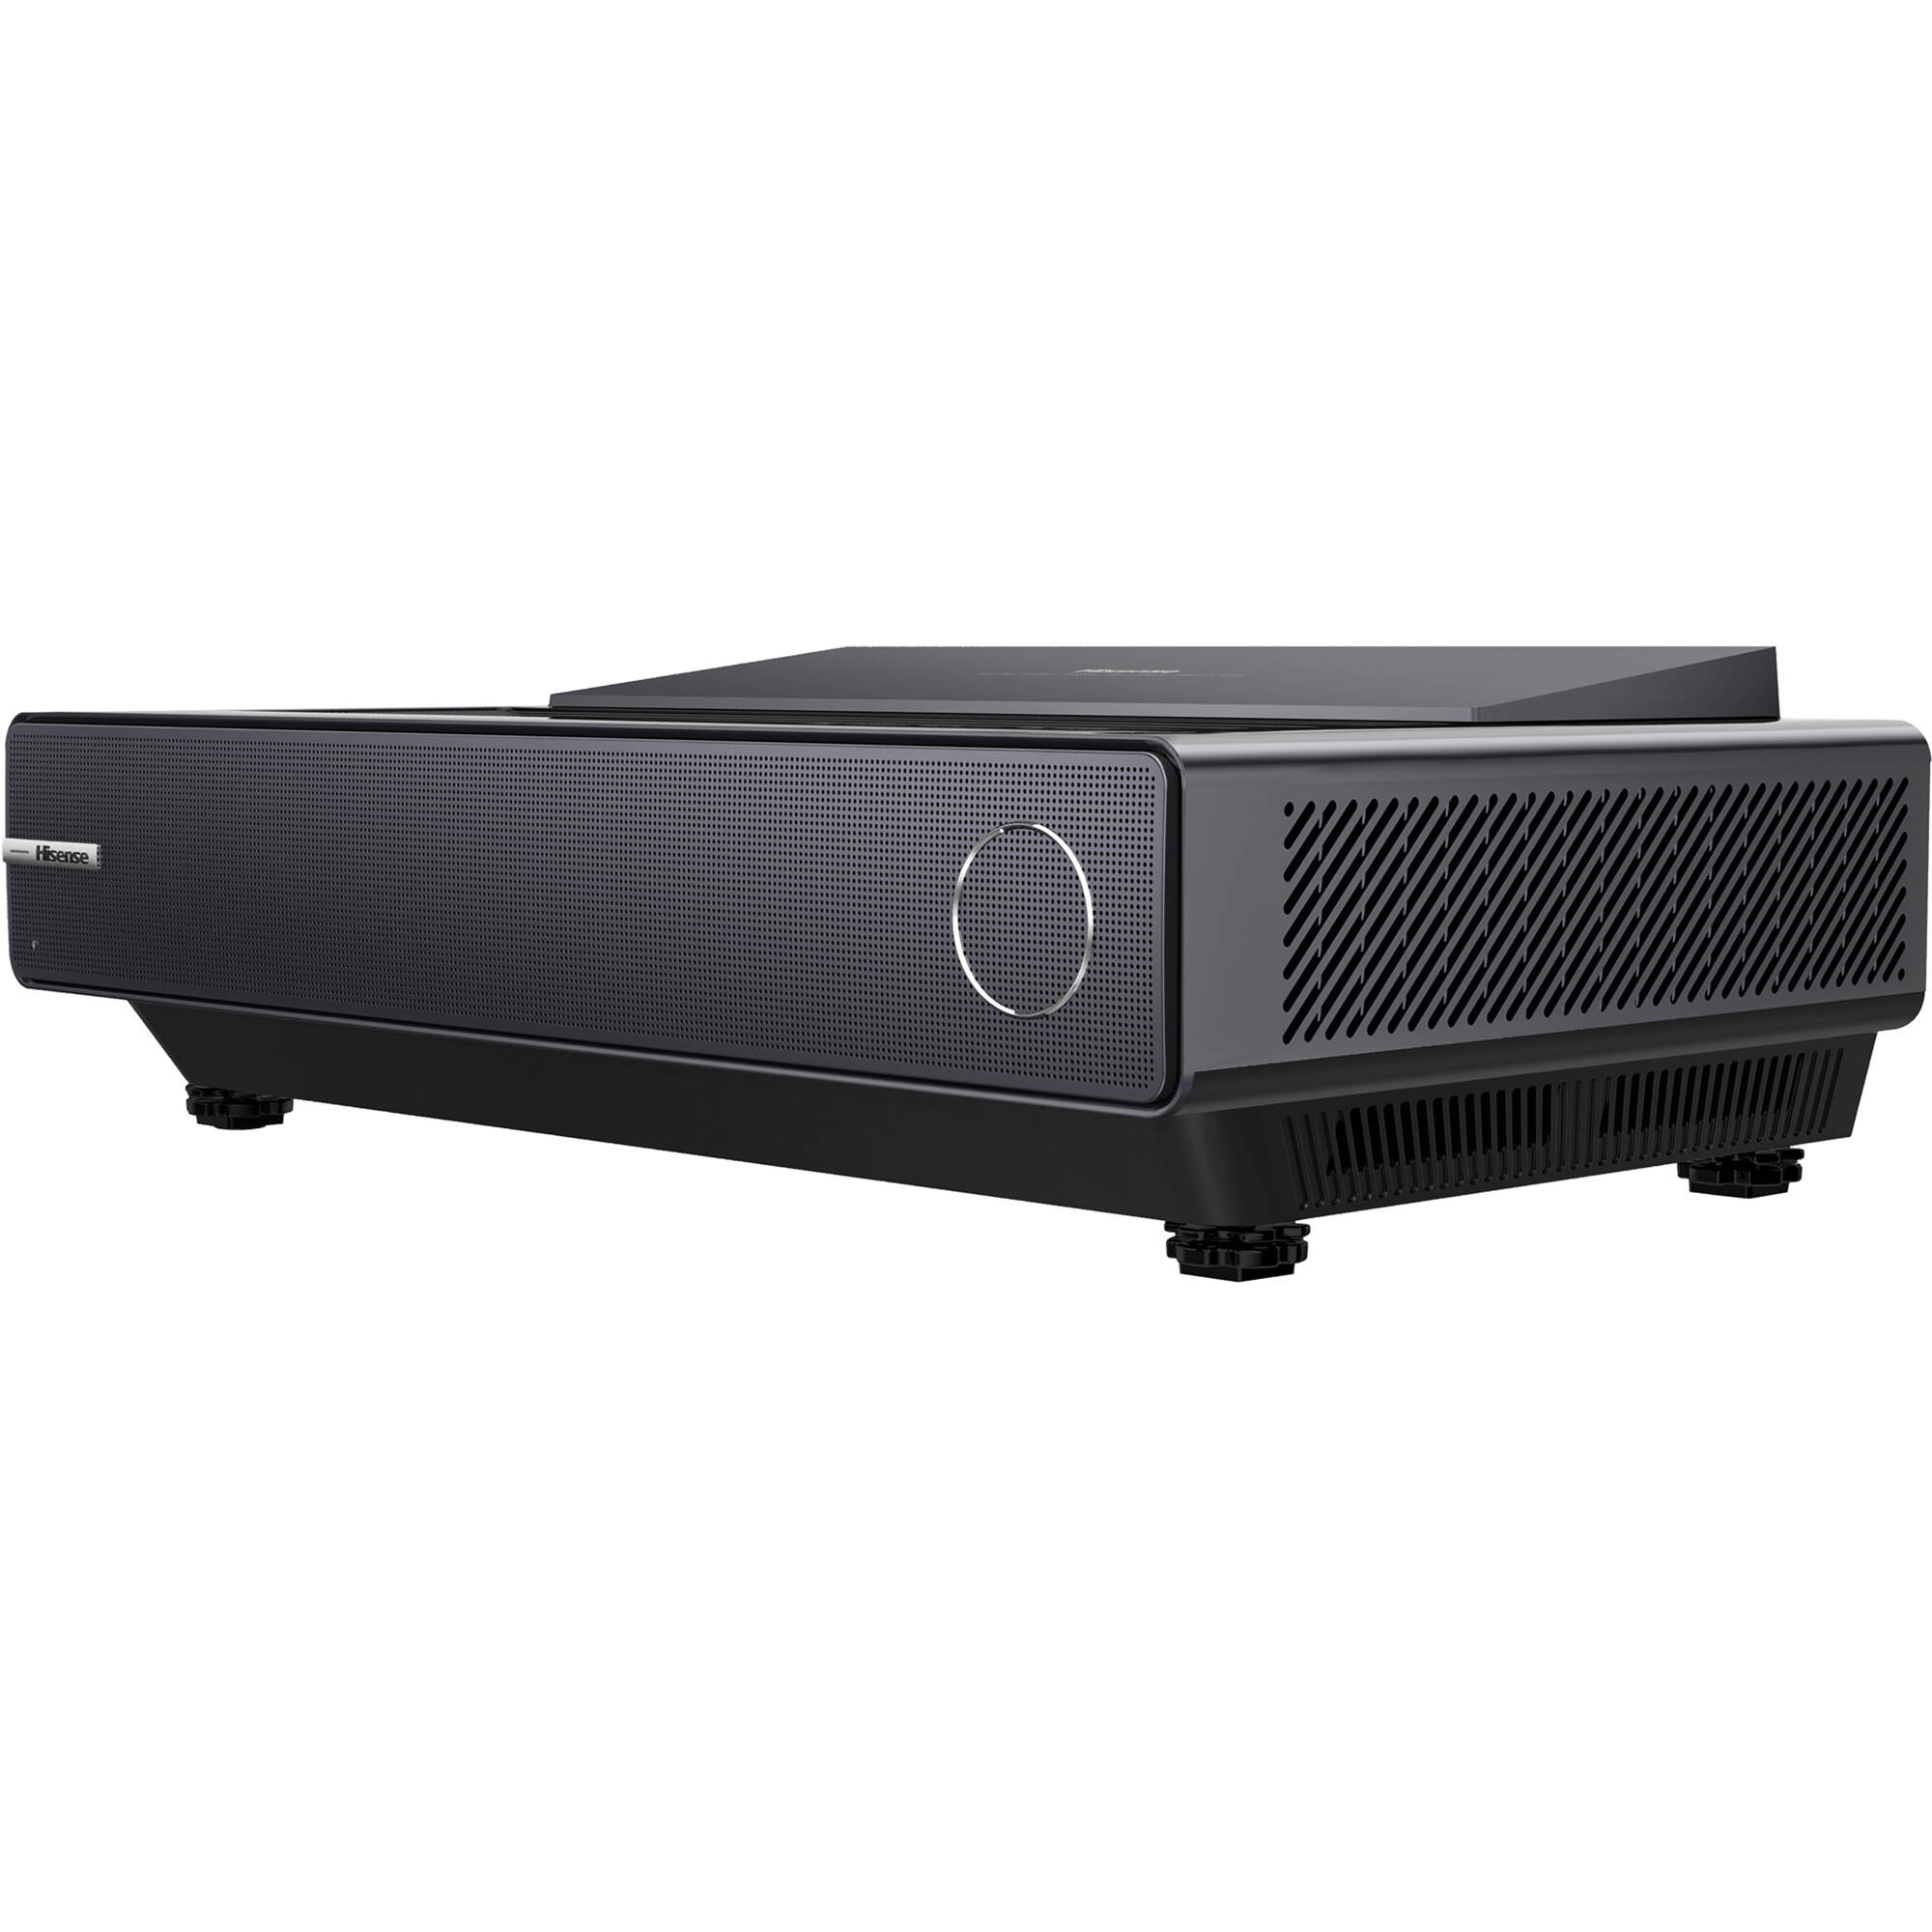 Hisense PX1-PRO-RB UHD Laser Short Throw Projector - Certified Refurbished